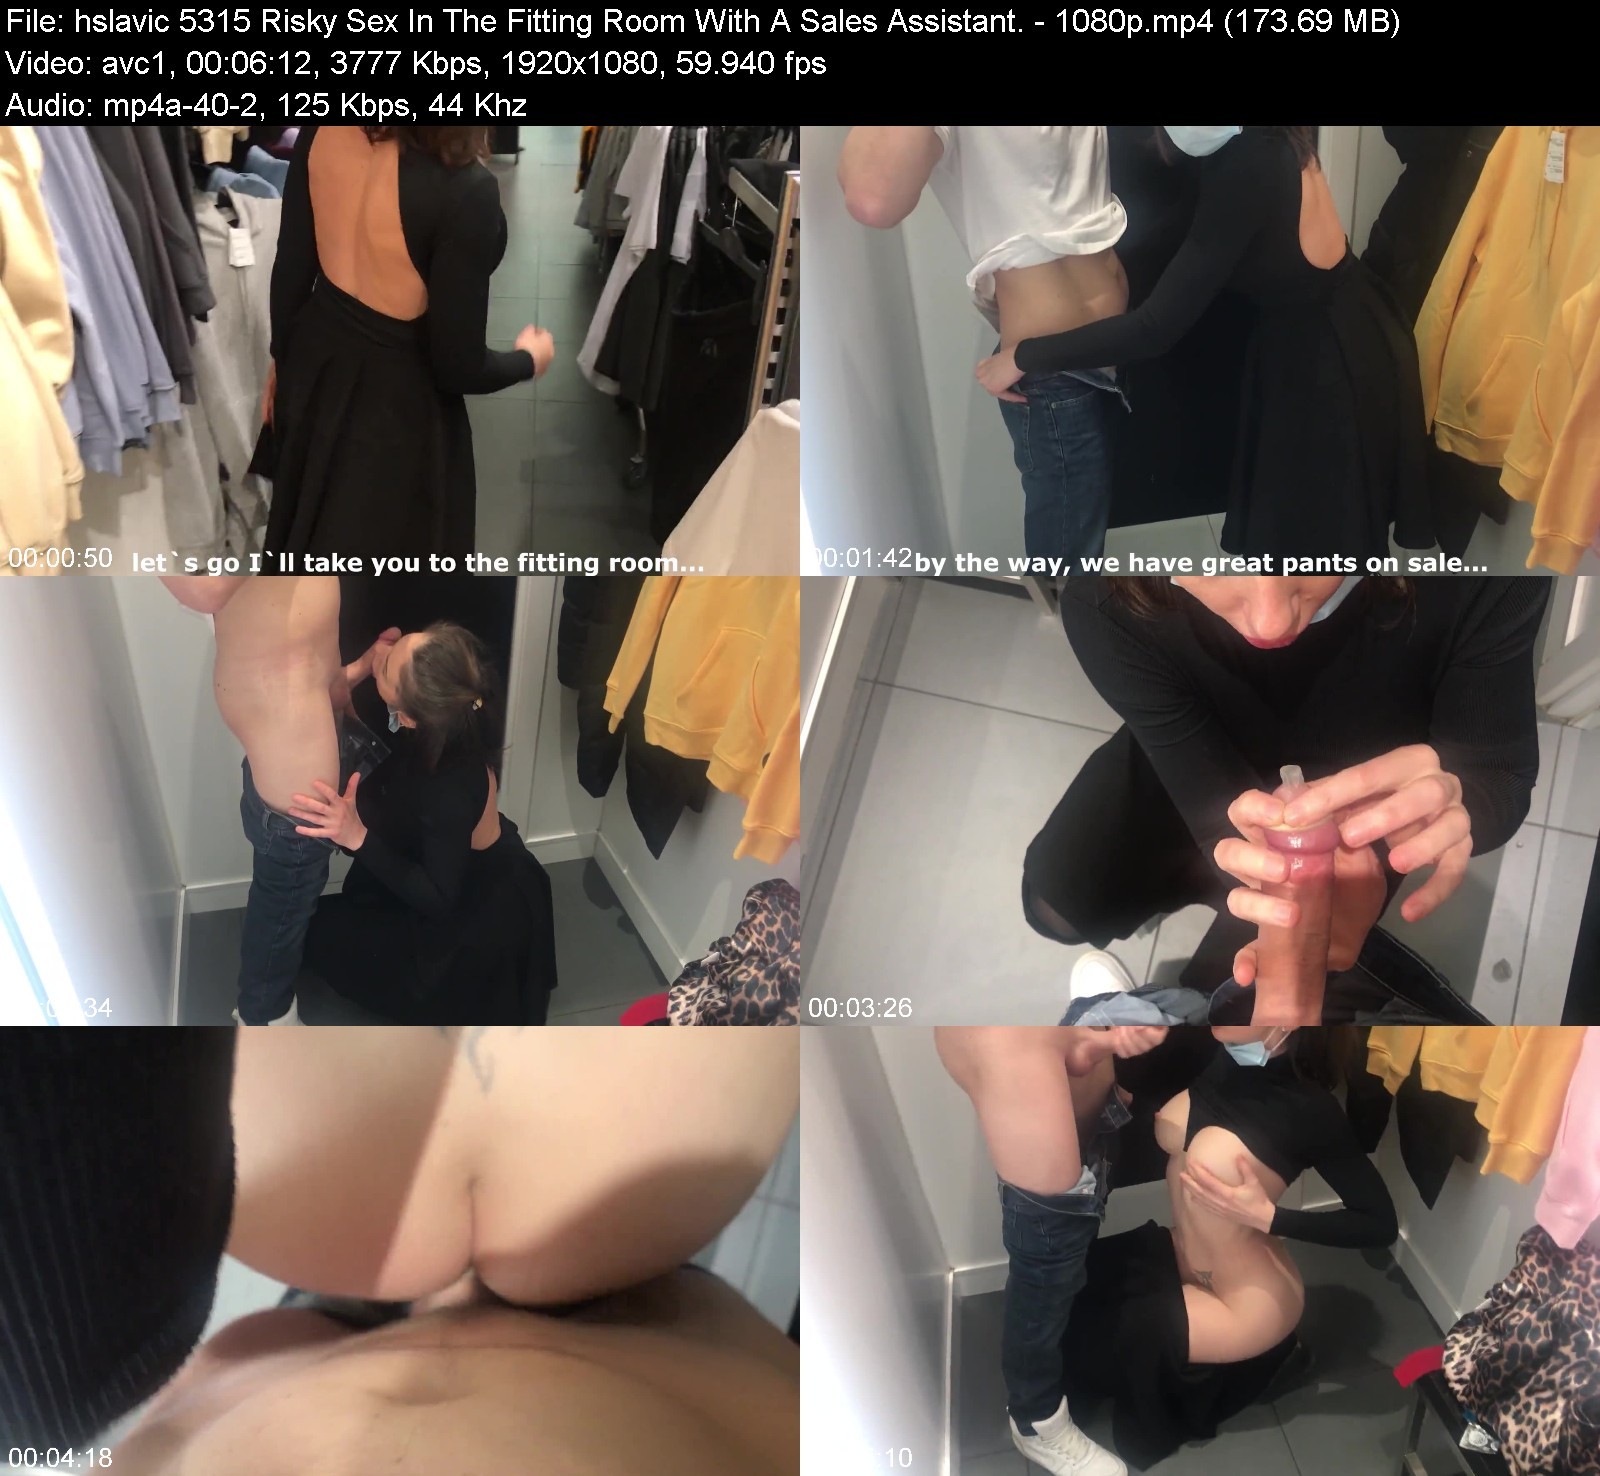 Risky sex in the fitting room with sales assistant